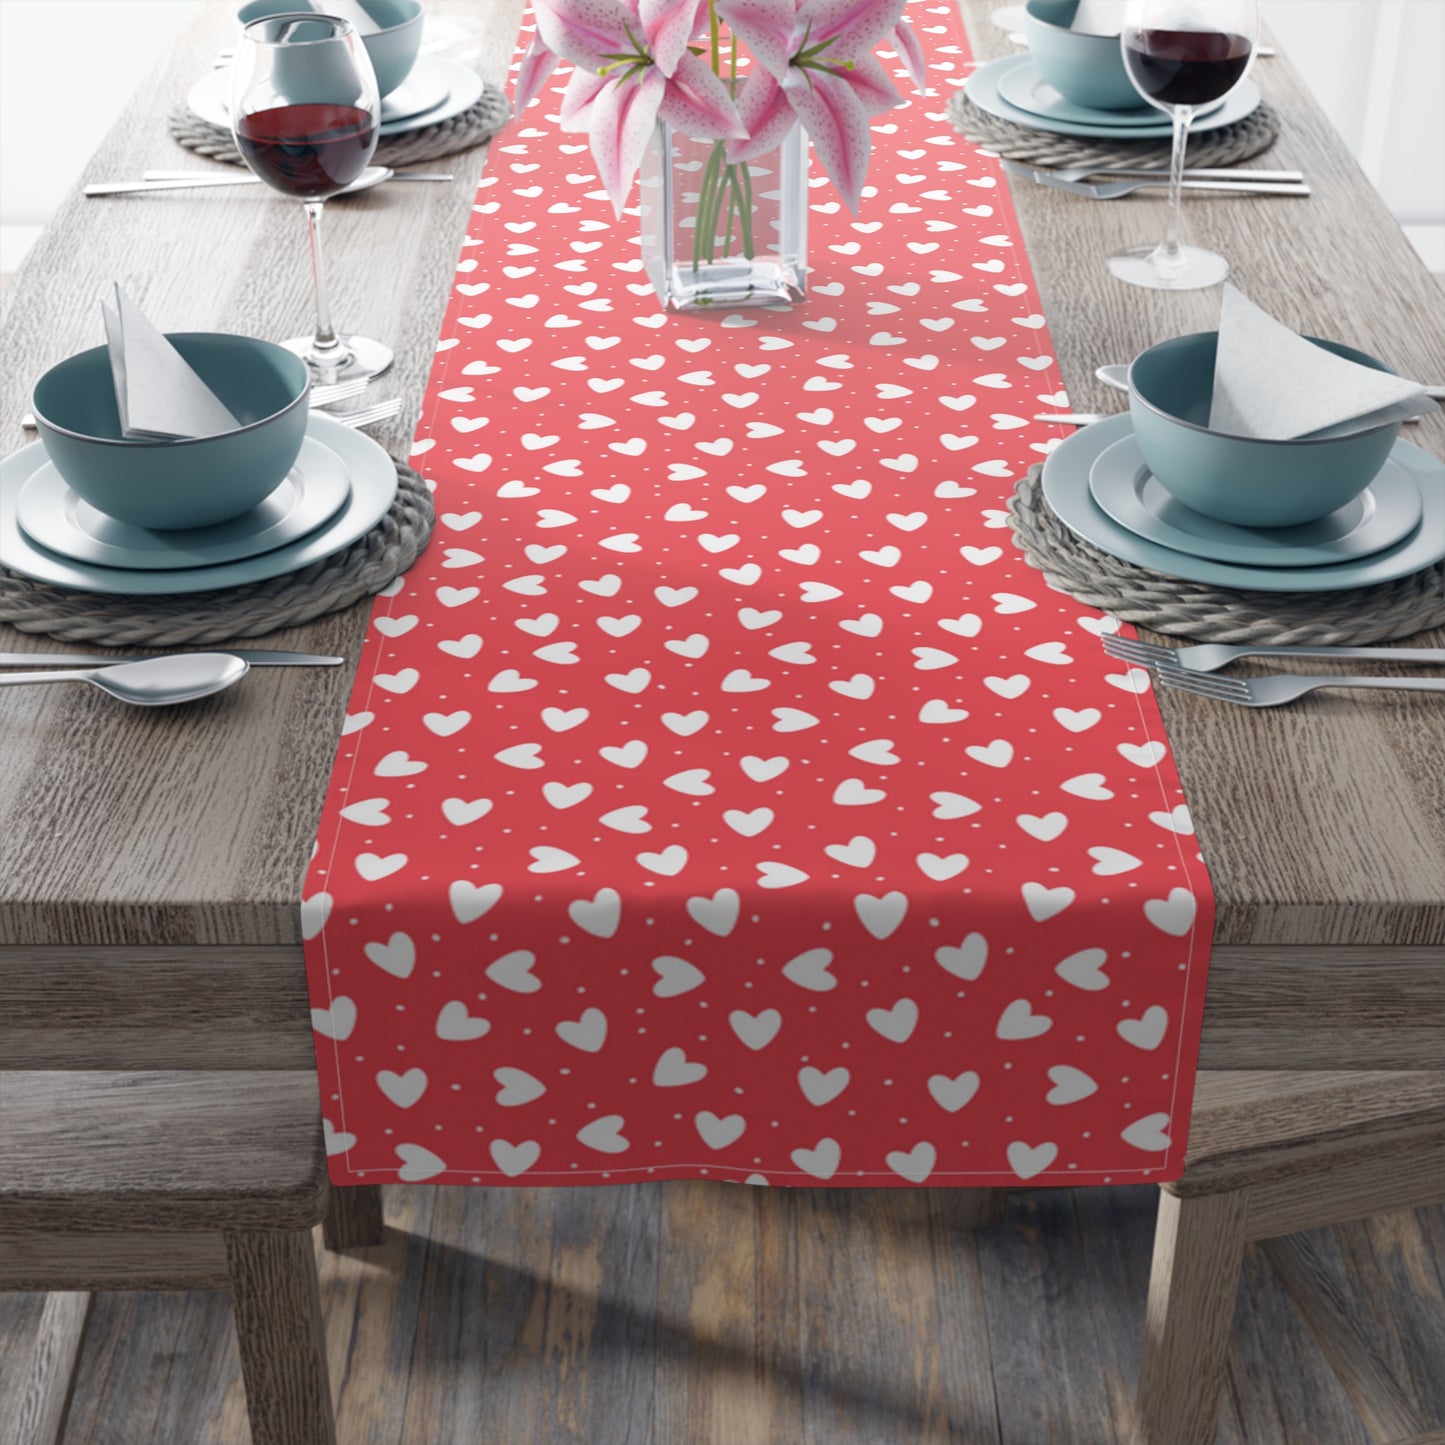 Hearts Table Runner, Valentine's Day Love Red Pink Romantic Home Decor Decoration Theme Tablecoth Dining Cotton Linen Starcove Fashion